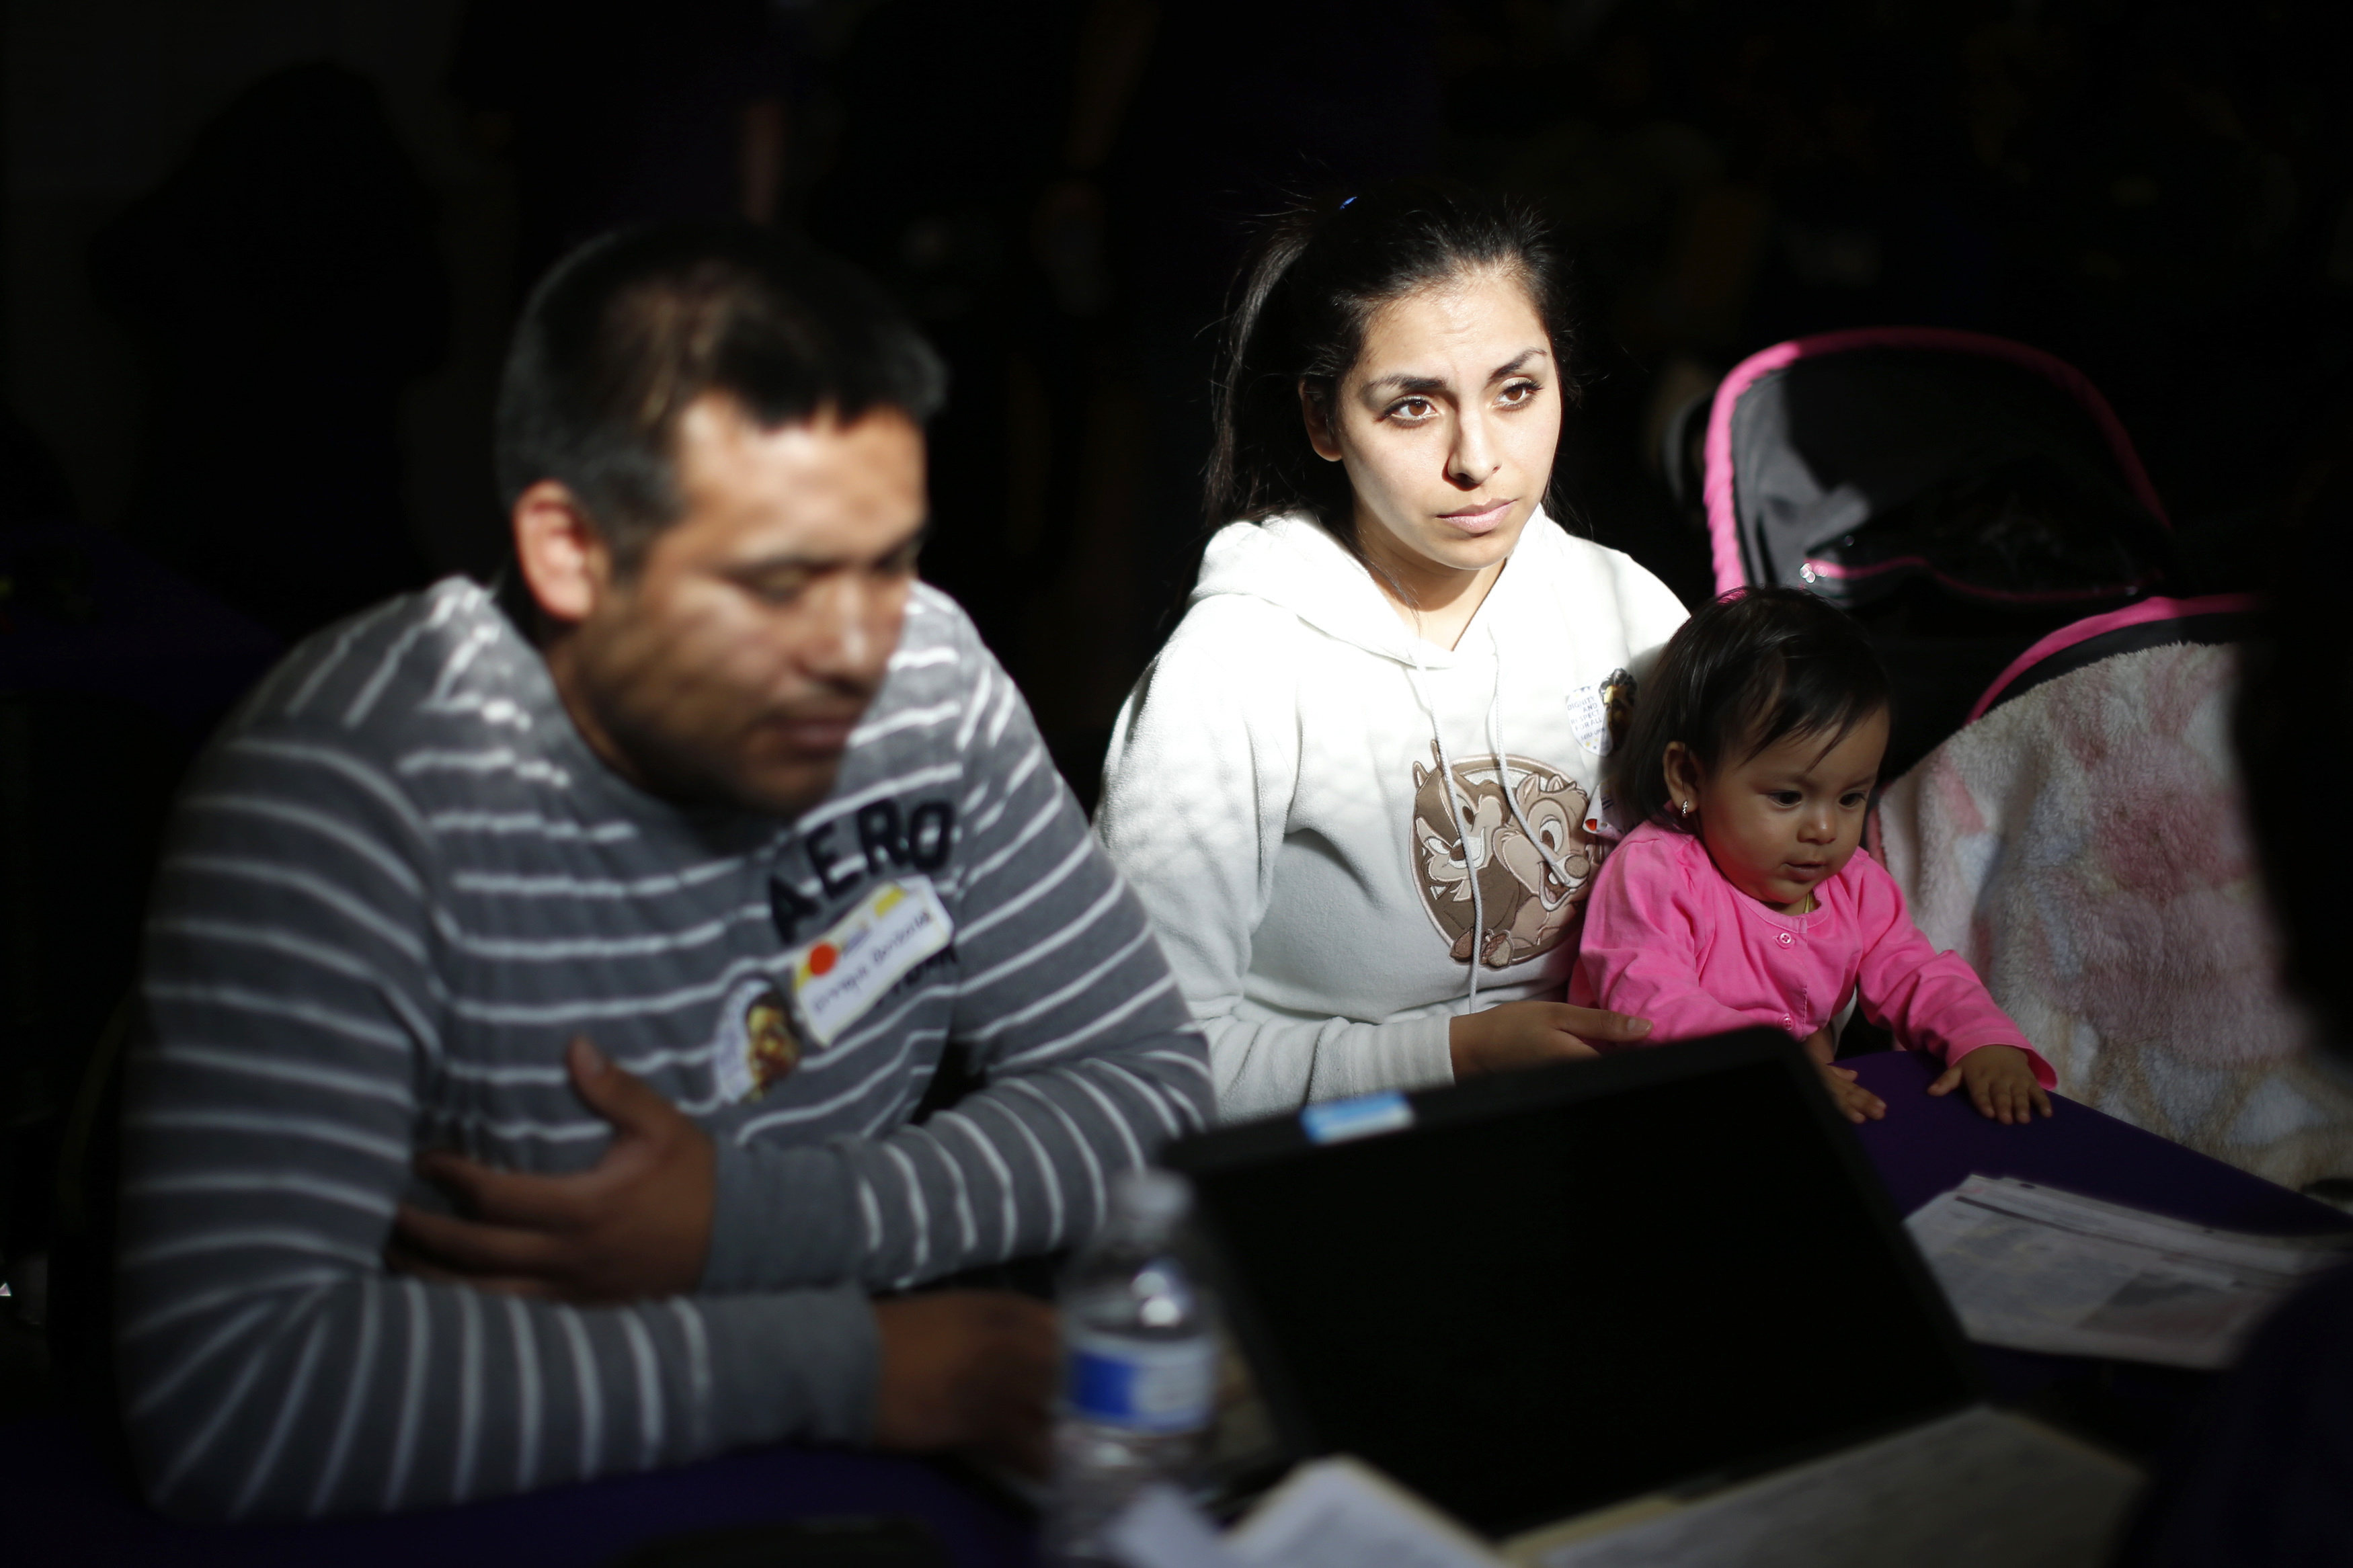 From left: Enrique Gonzalez, 22, Janet Regalado, 21, and their nine-month-old daughter Kayleen Gonzalez sign up for health insurance at an enrolment event in Commerce, Calif., on March 31, 2014.